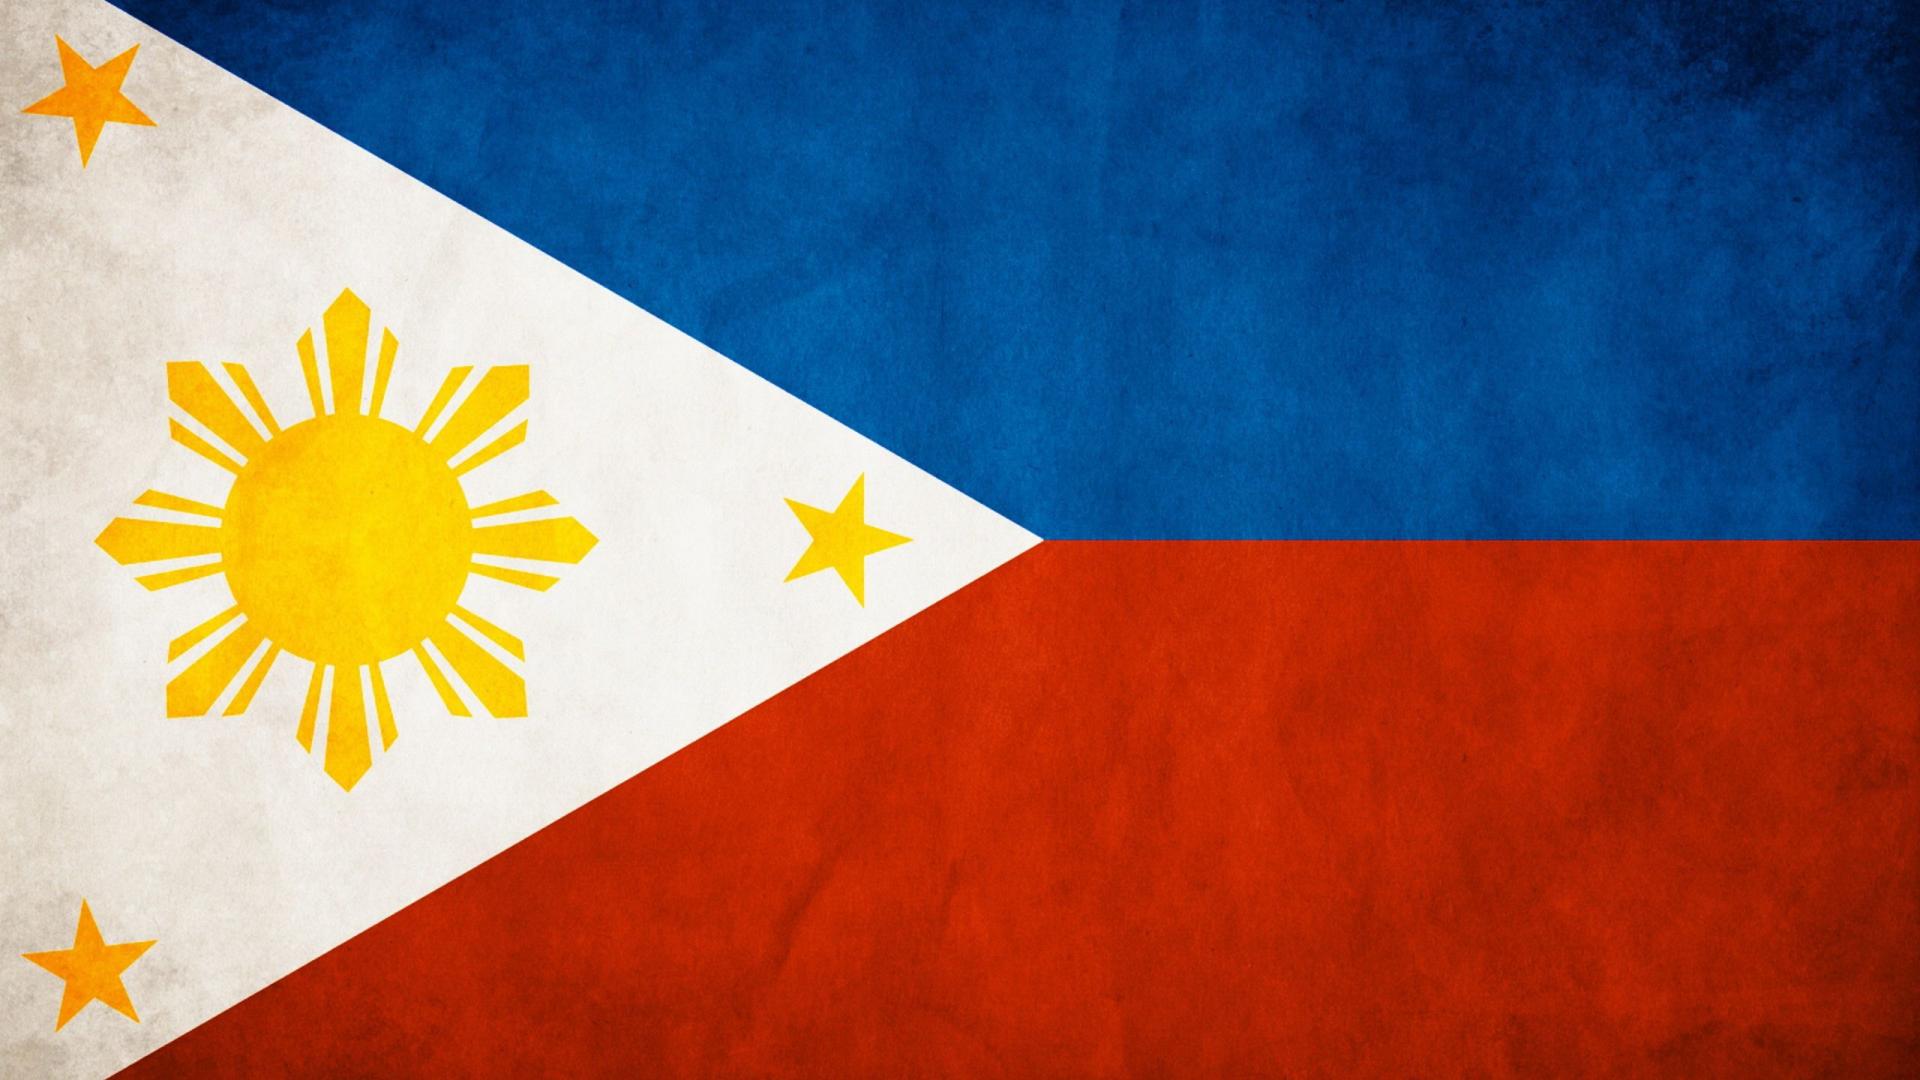 Download Philippines Flag Wallpaper Mixhd By Zacharyrios Philippines Flag Wallpapers